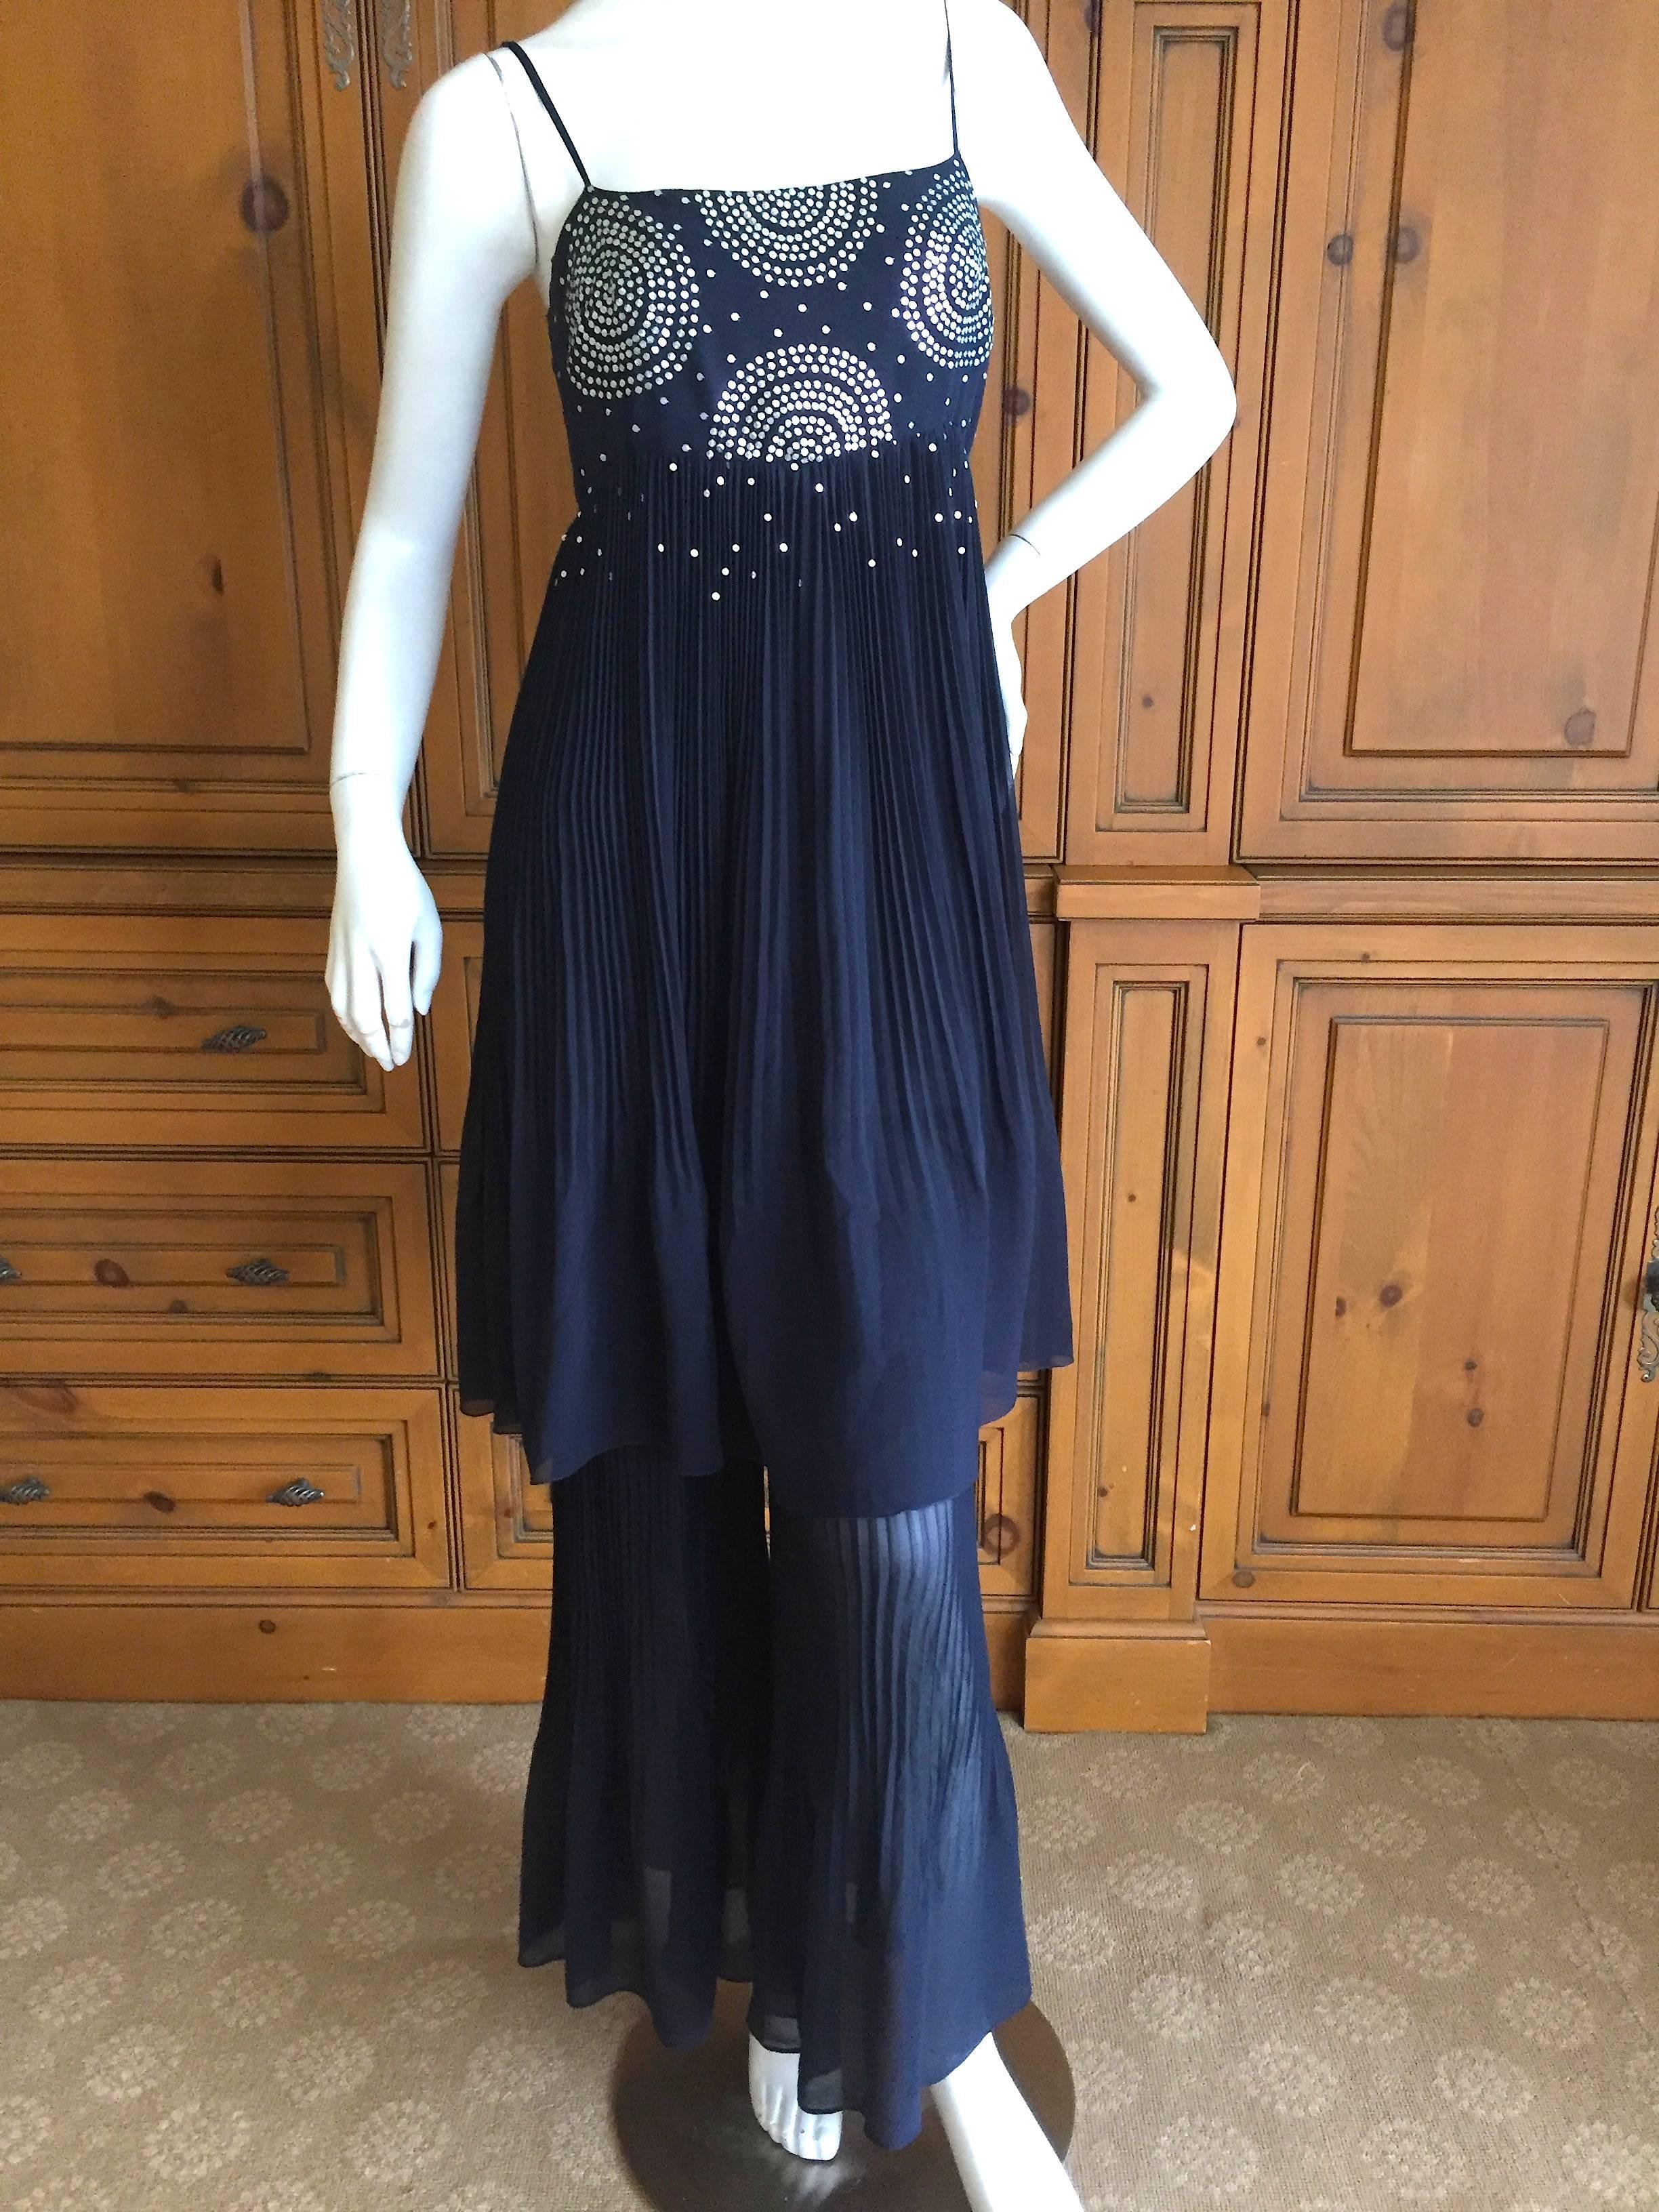 Chanel Navy Blue Dress with Silver Sequin Embellishment 2